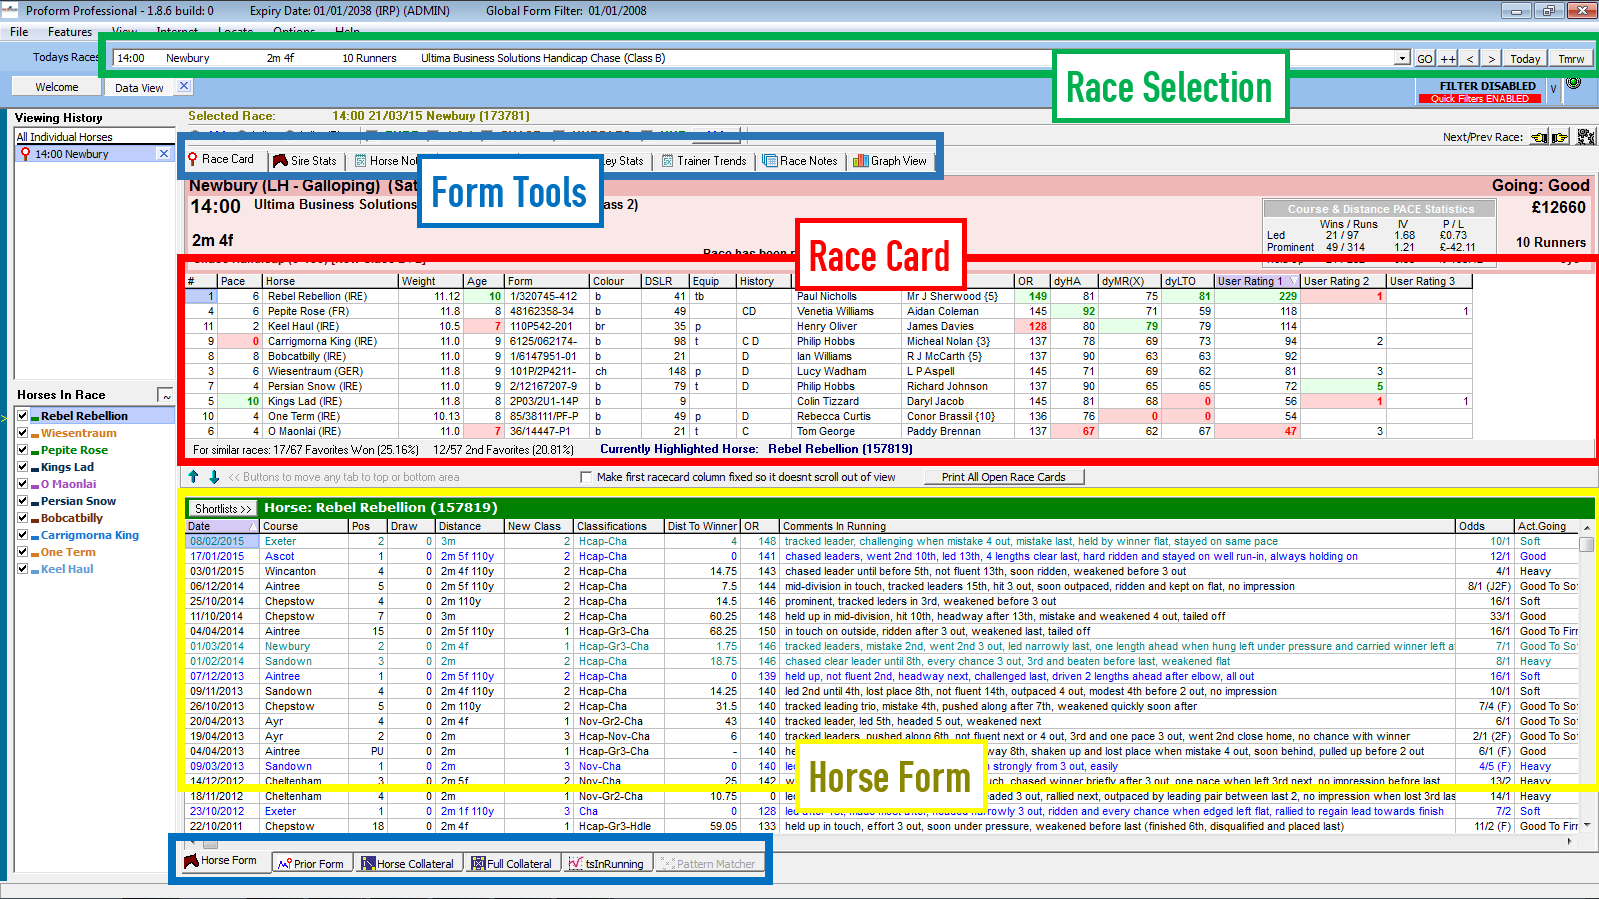 horse racing betting systems pdf editor